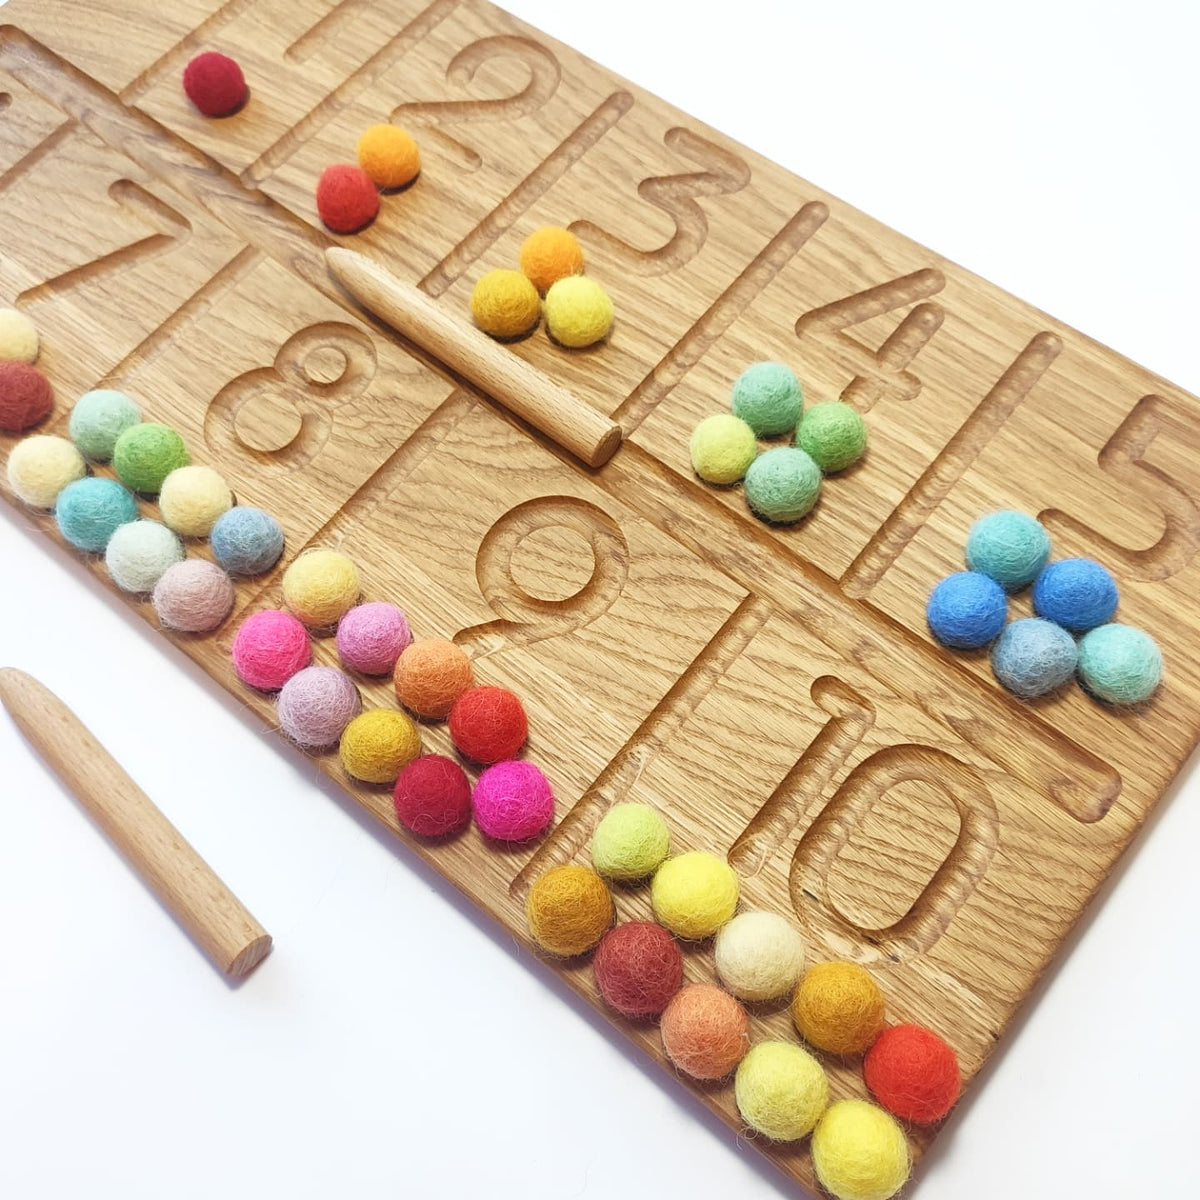 Number Tracing Wooden Board